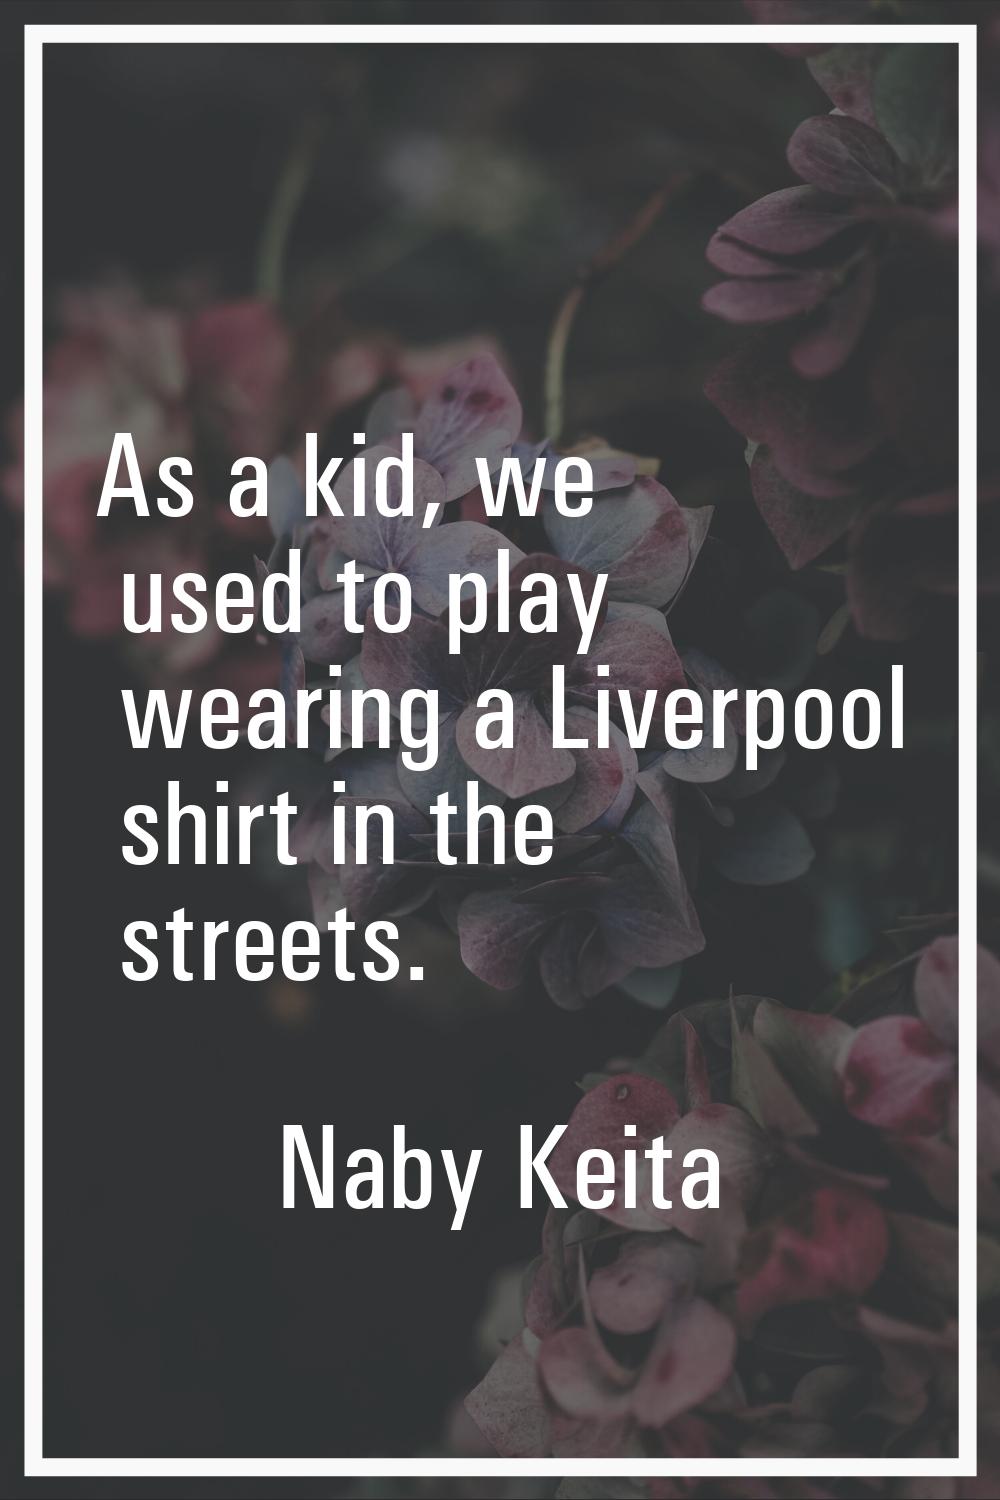 As a kid, we used to play wearing a Liverpool shirt in the streets.